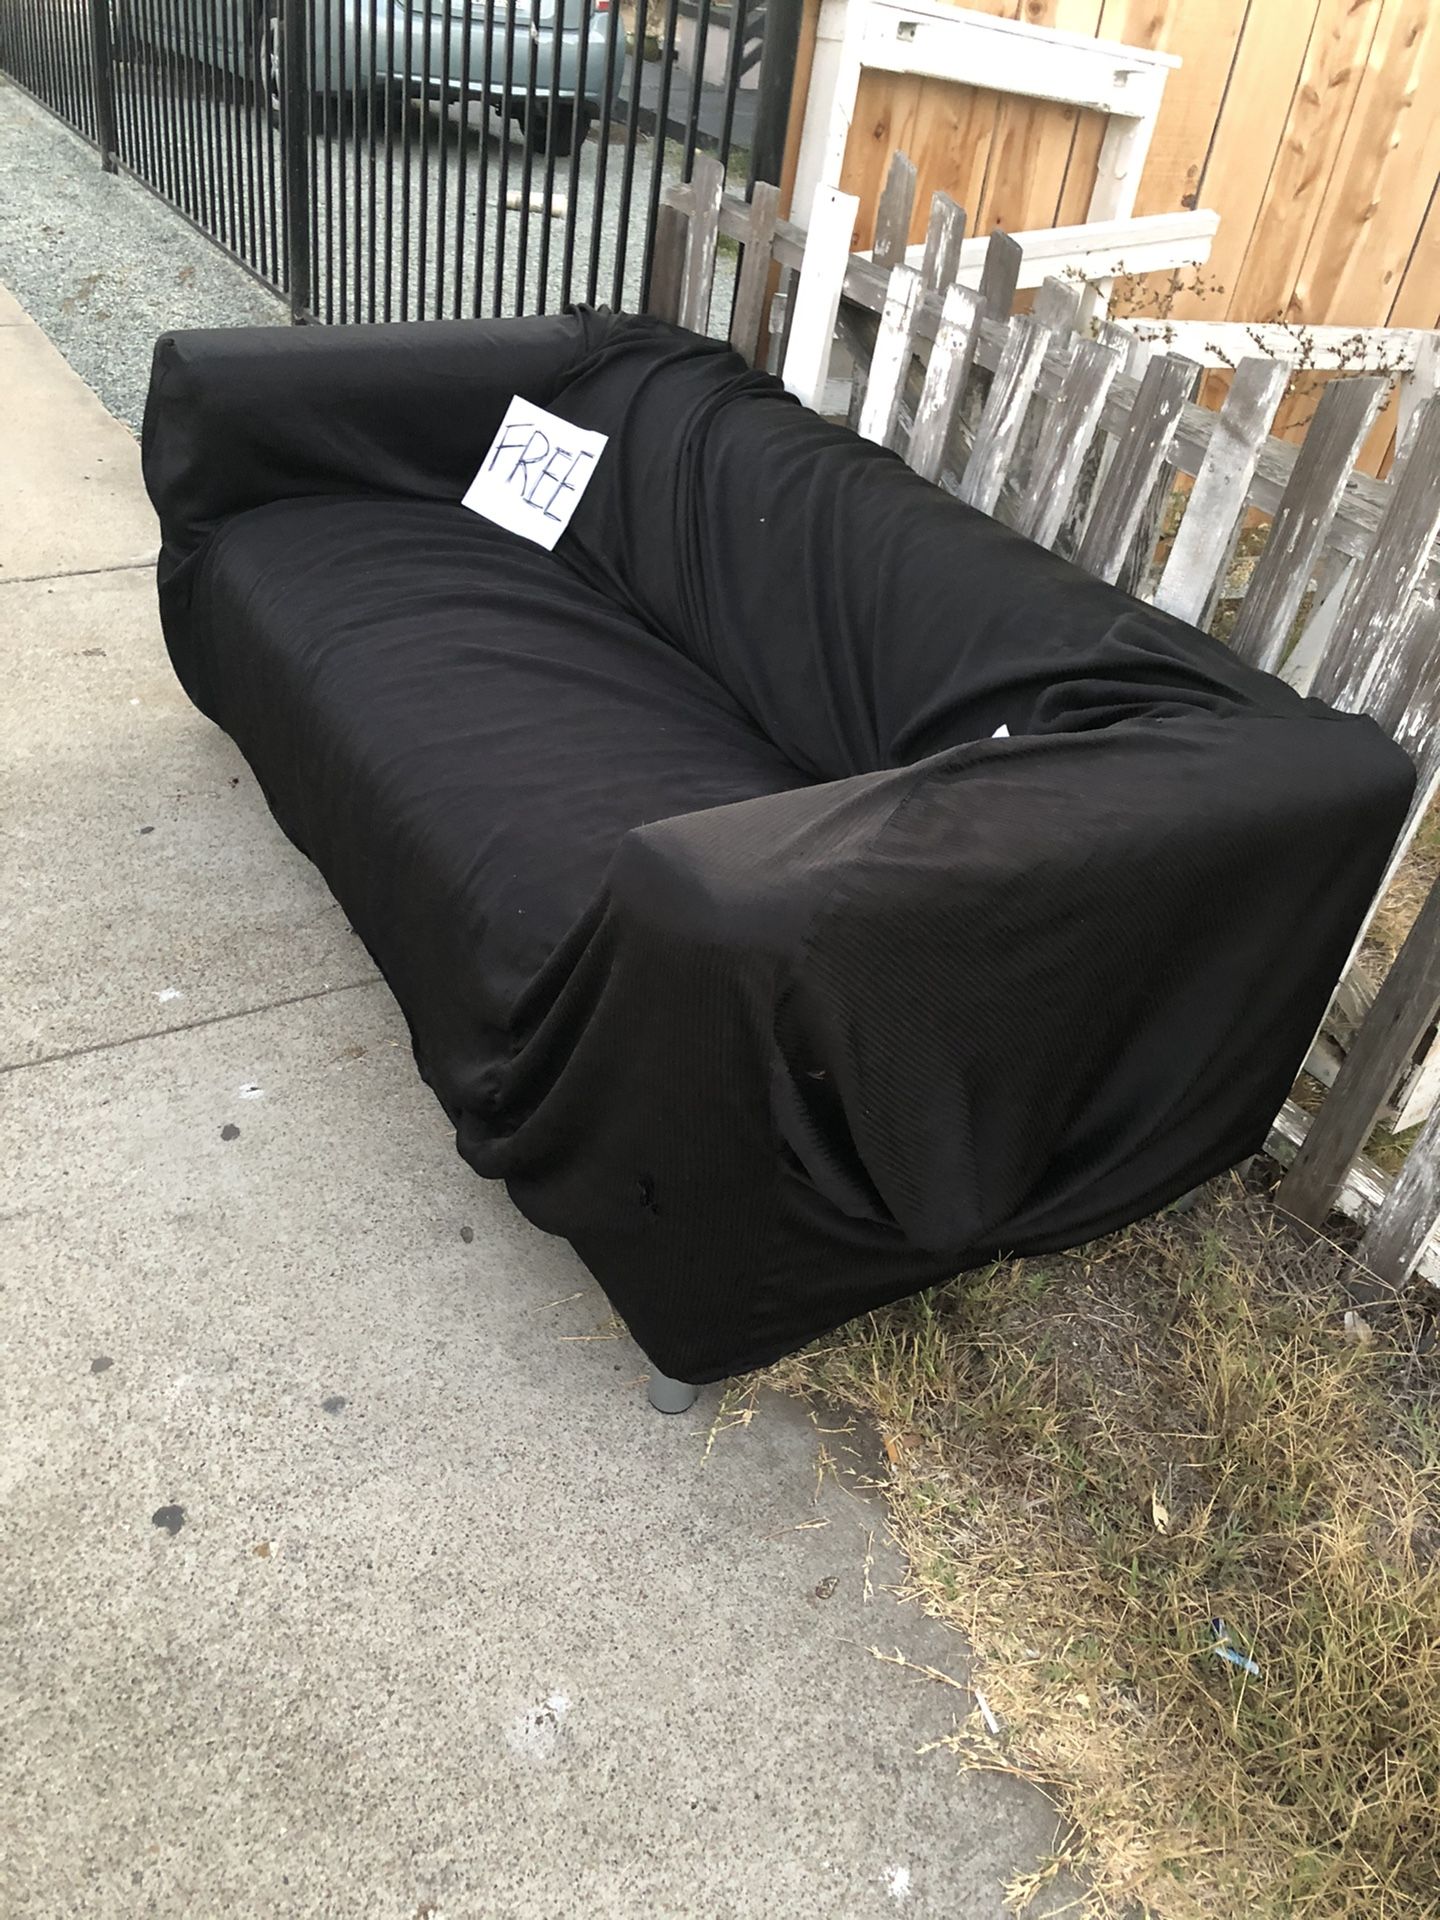 Curb alert - FREE couch